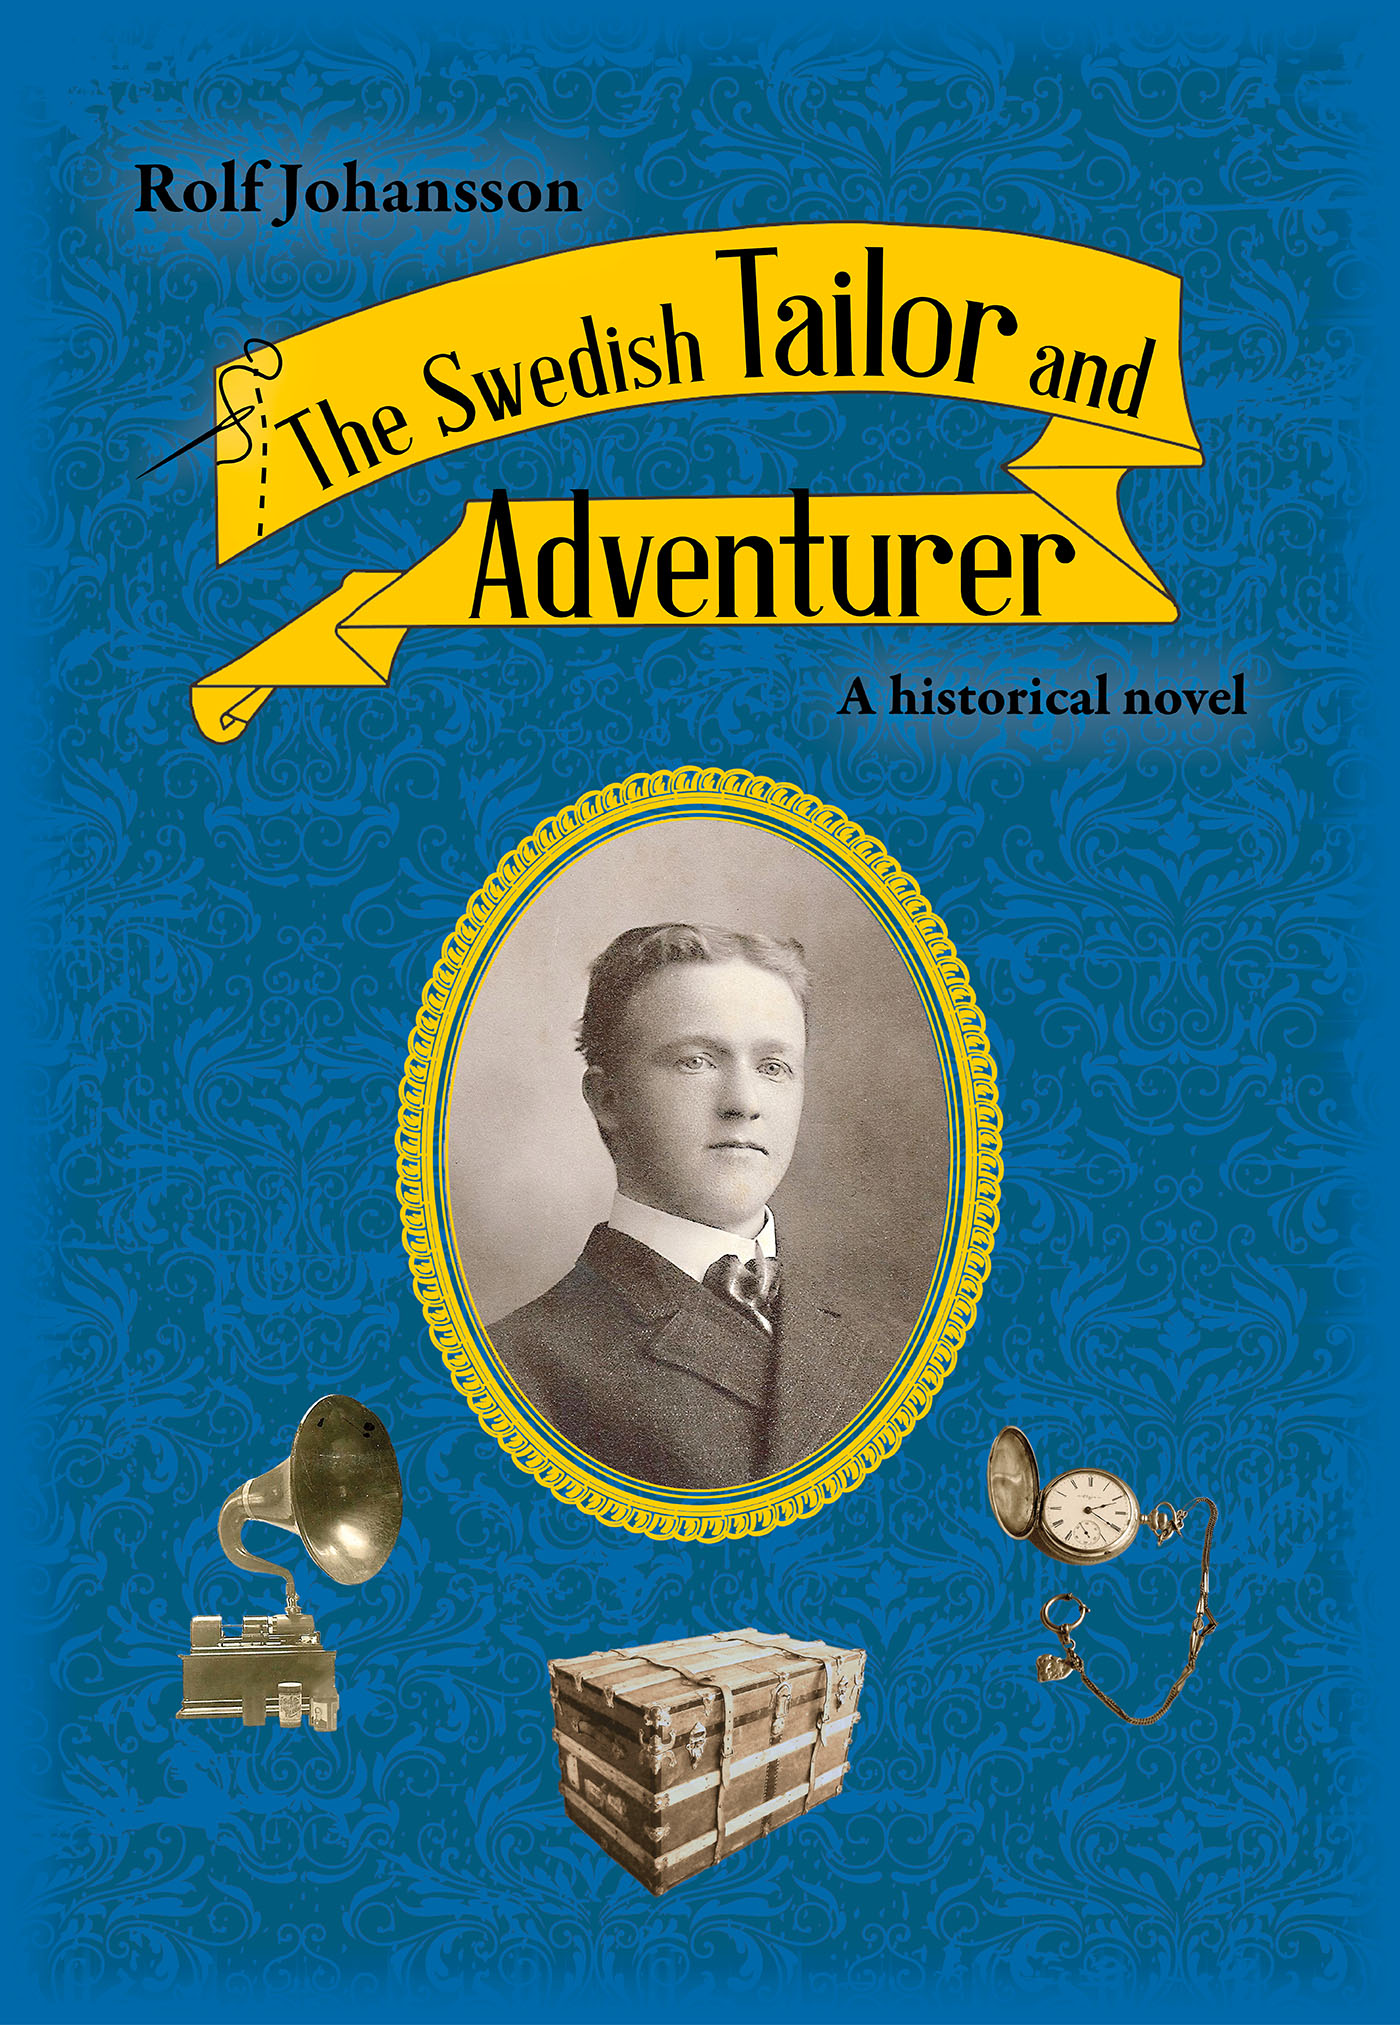 The Swedish Tailor and Adventurer by Rolf Johansson